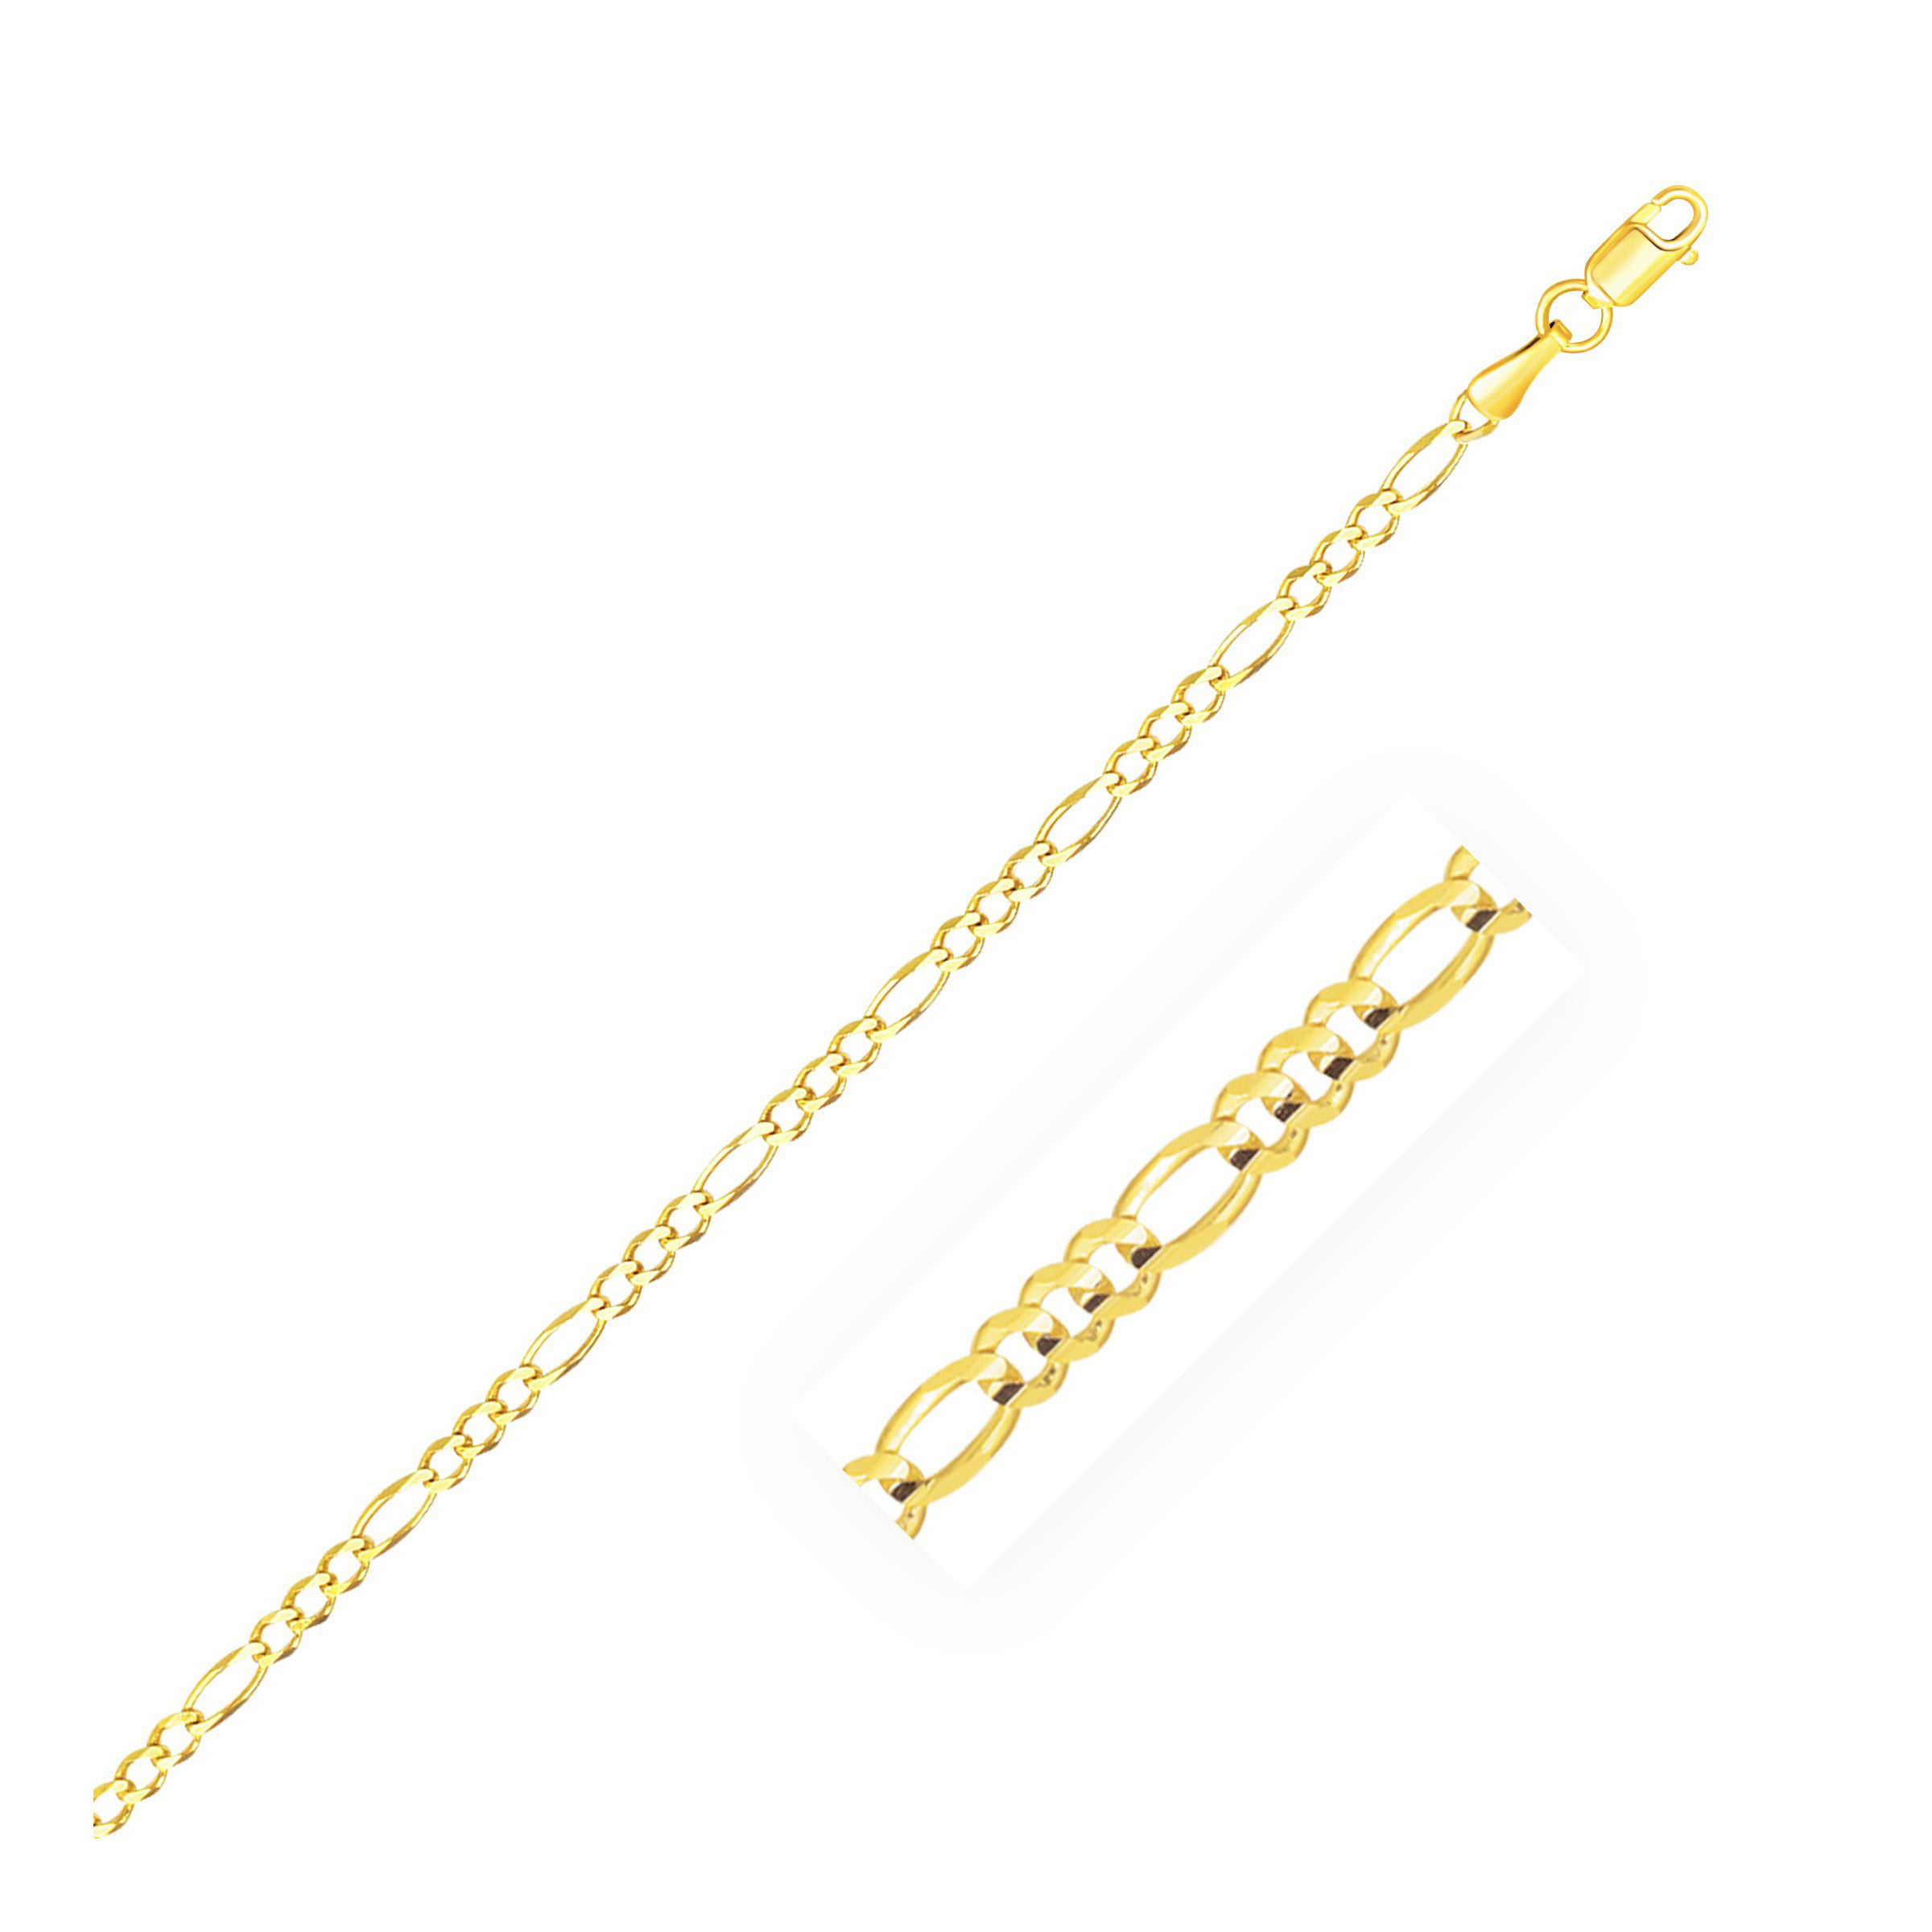 14k Yellow Gold Filled Solid Figaro Link Chain Necklace (4.2 mm, 20 inch)